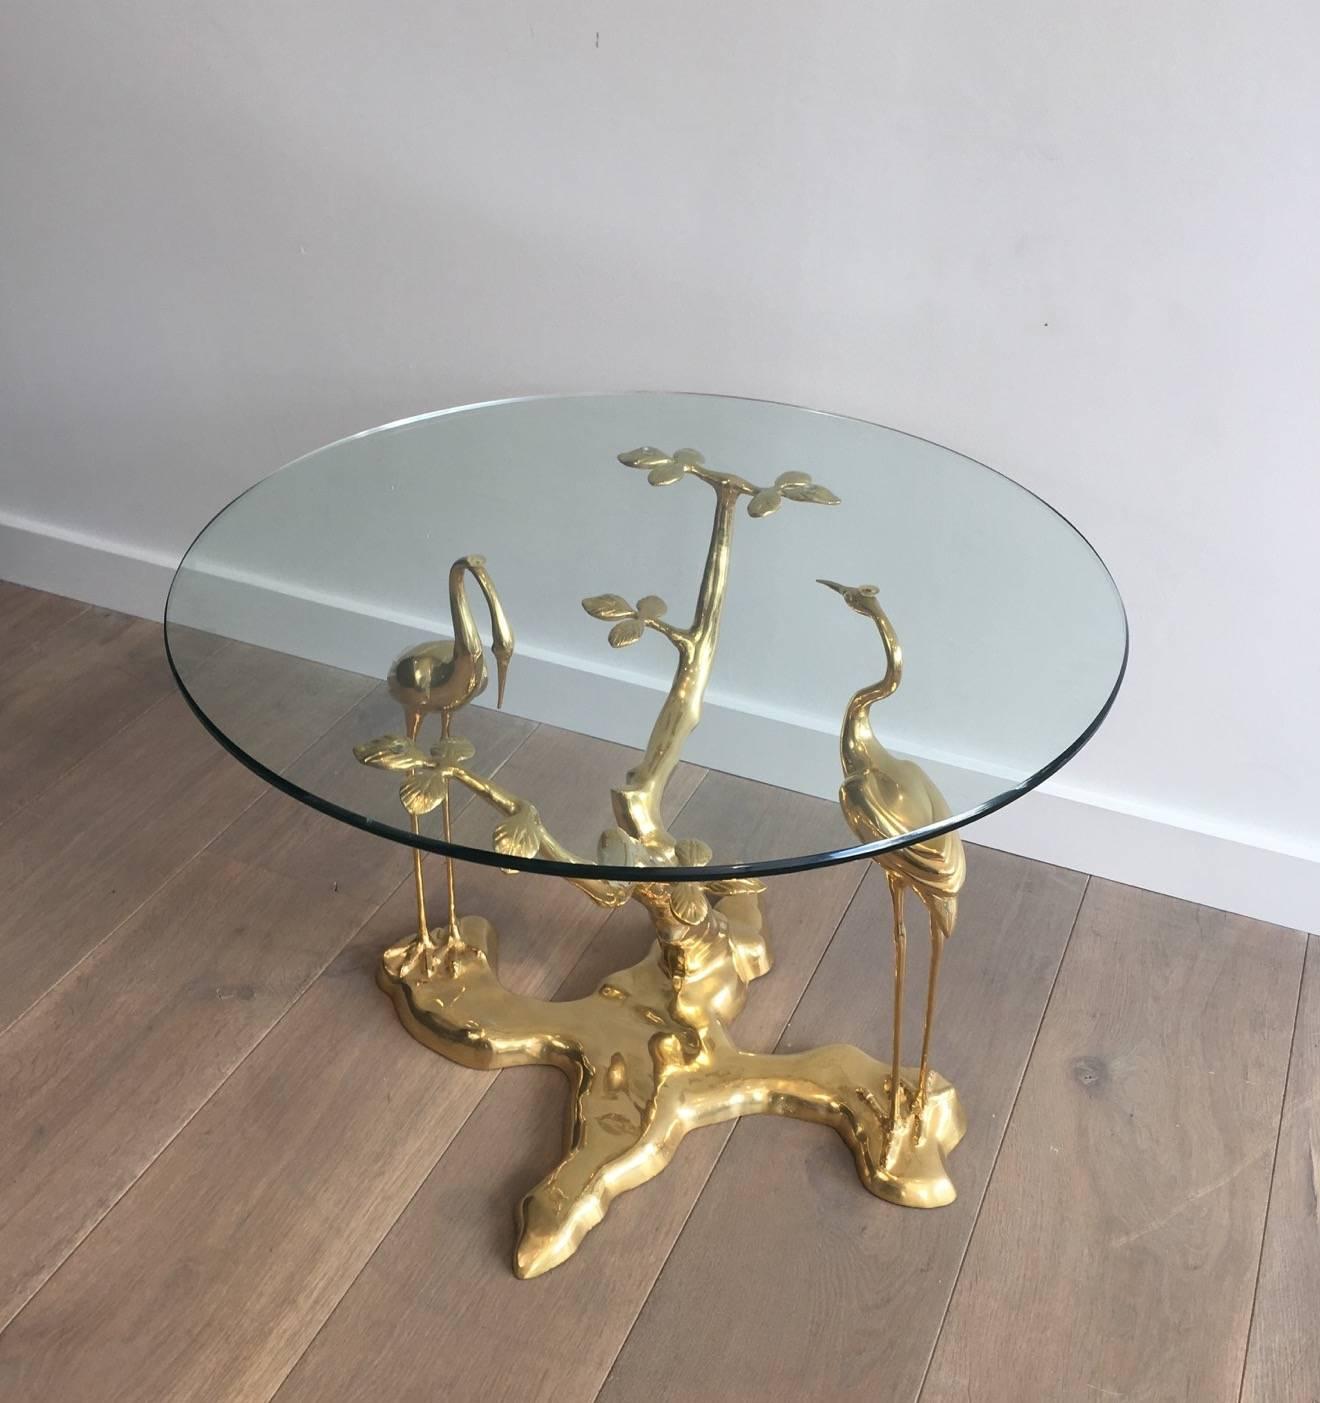 Rare Mid-Century Modern gilt bronze coffee table by Belgian designer Willy Daro representing a pair of herons standing next to a tree, French, 1970s.
 
This table is currently in France, please allow 4 to 6 weeks delivery to our warehouse in Long